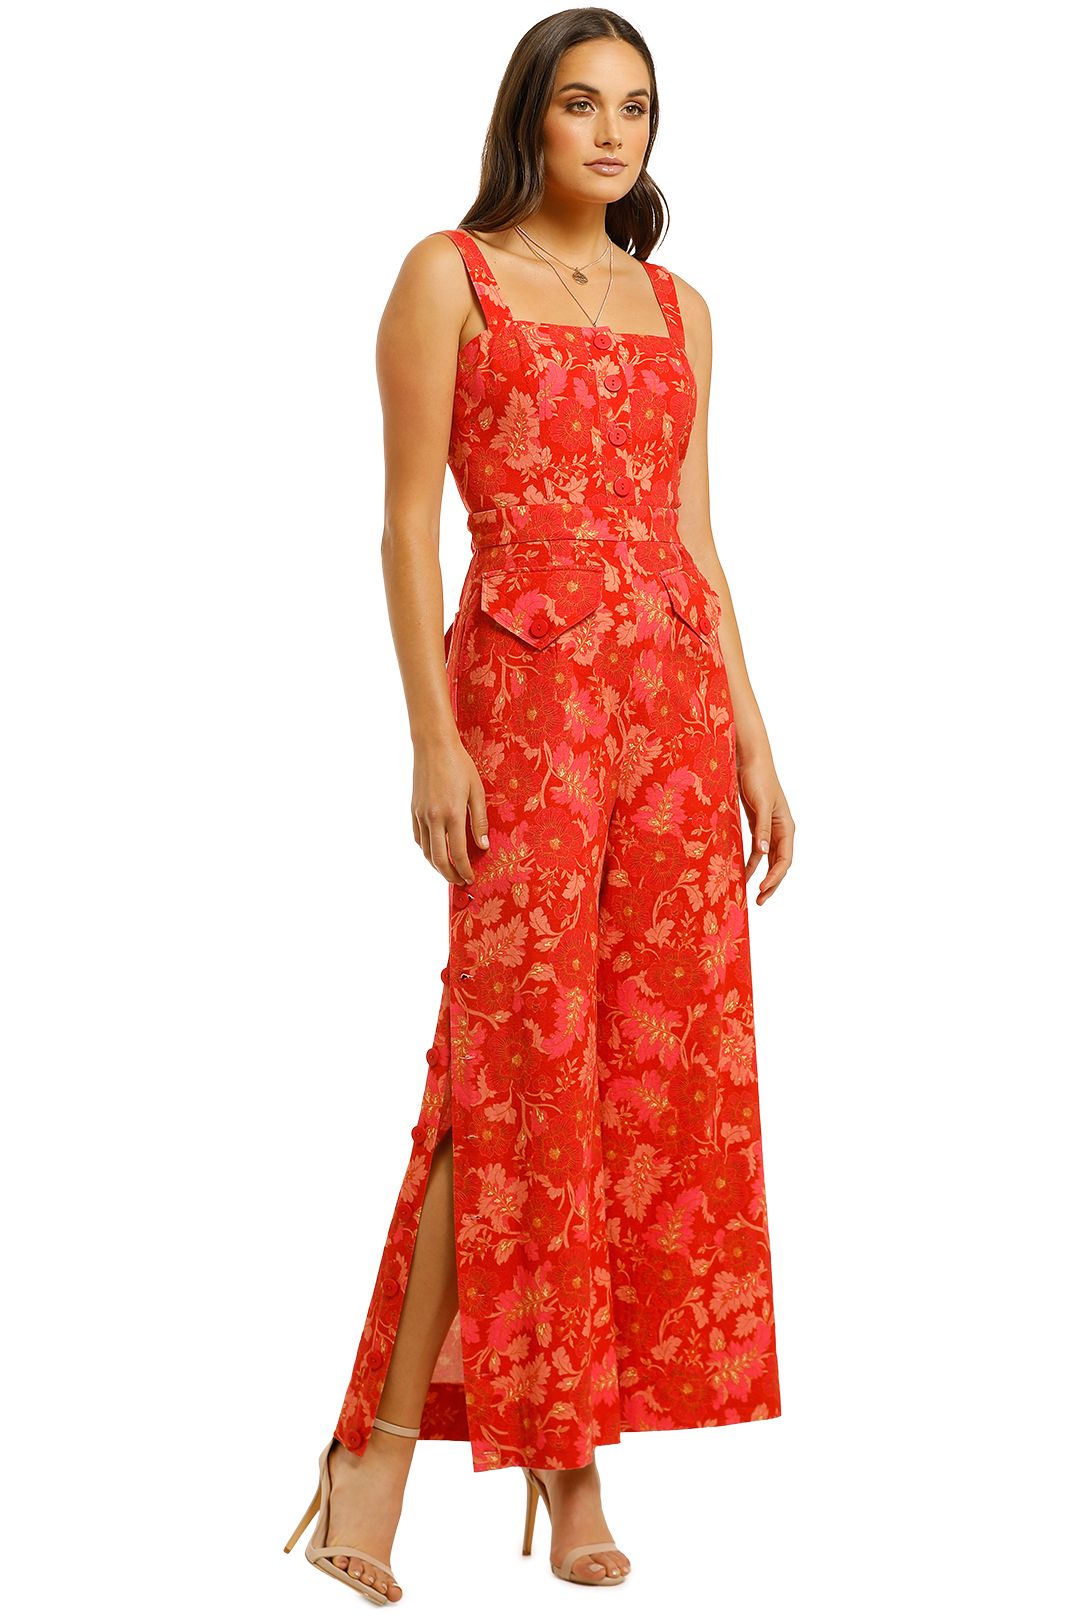 Ministry-of-Style-Hibiscus-Jumpsuit-Print-Side